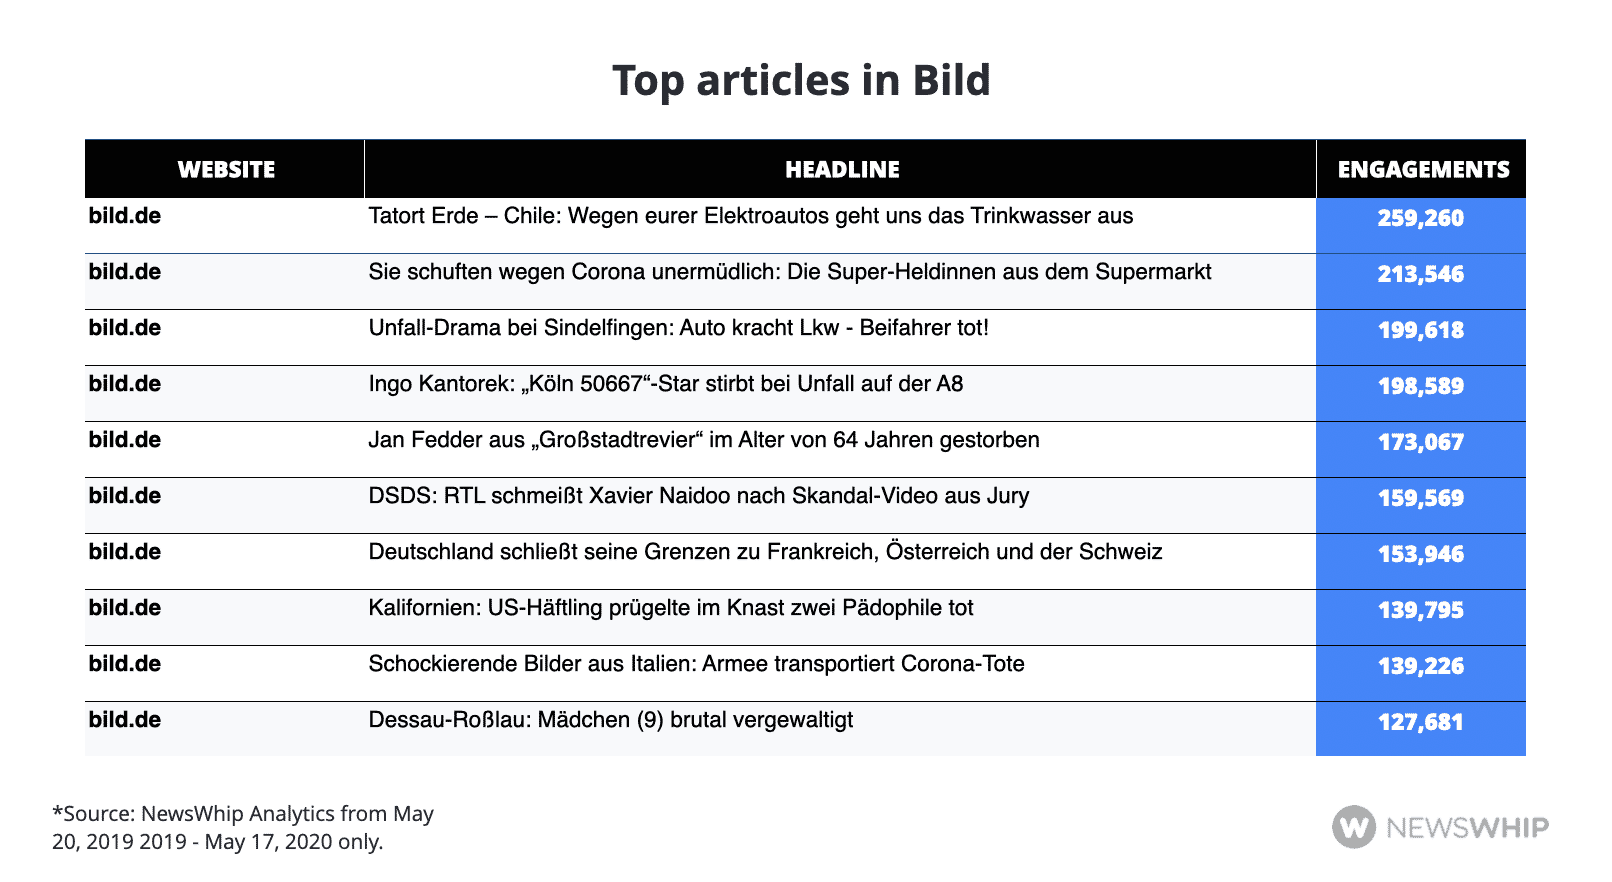 Chart showing the most engaged articles in Bild in the last year, ranked by engagement